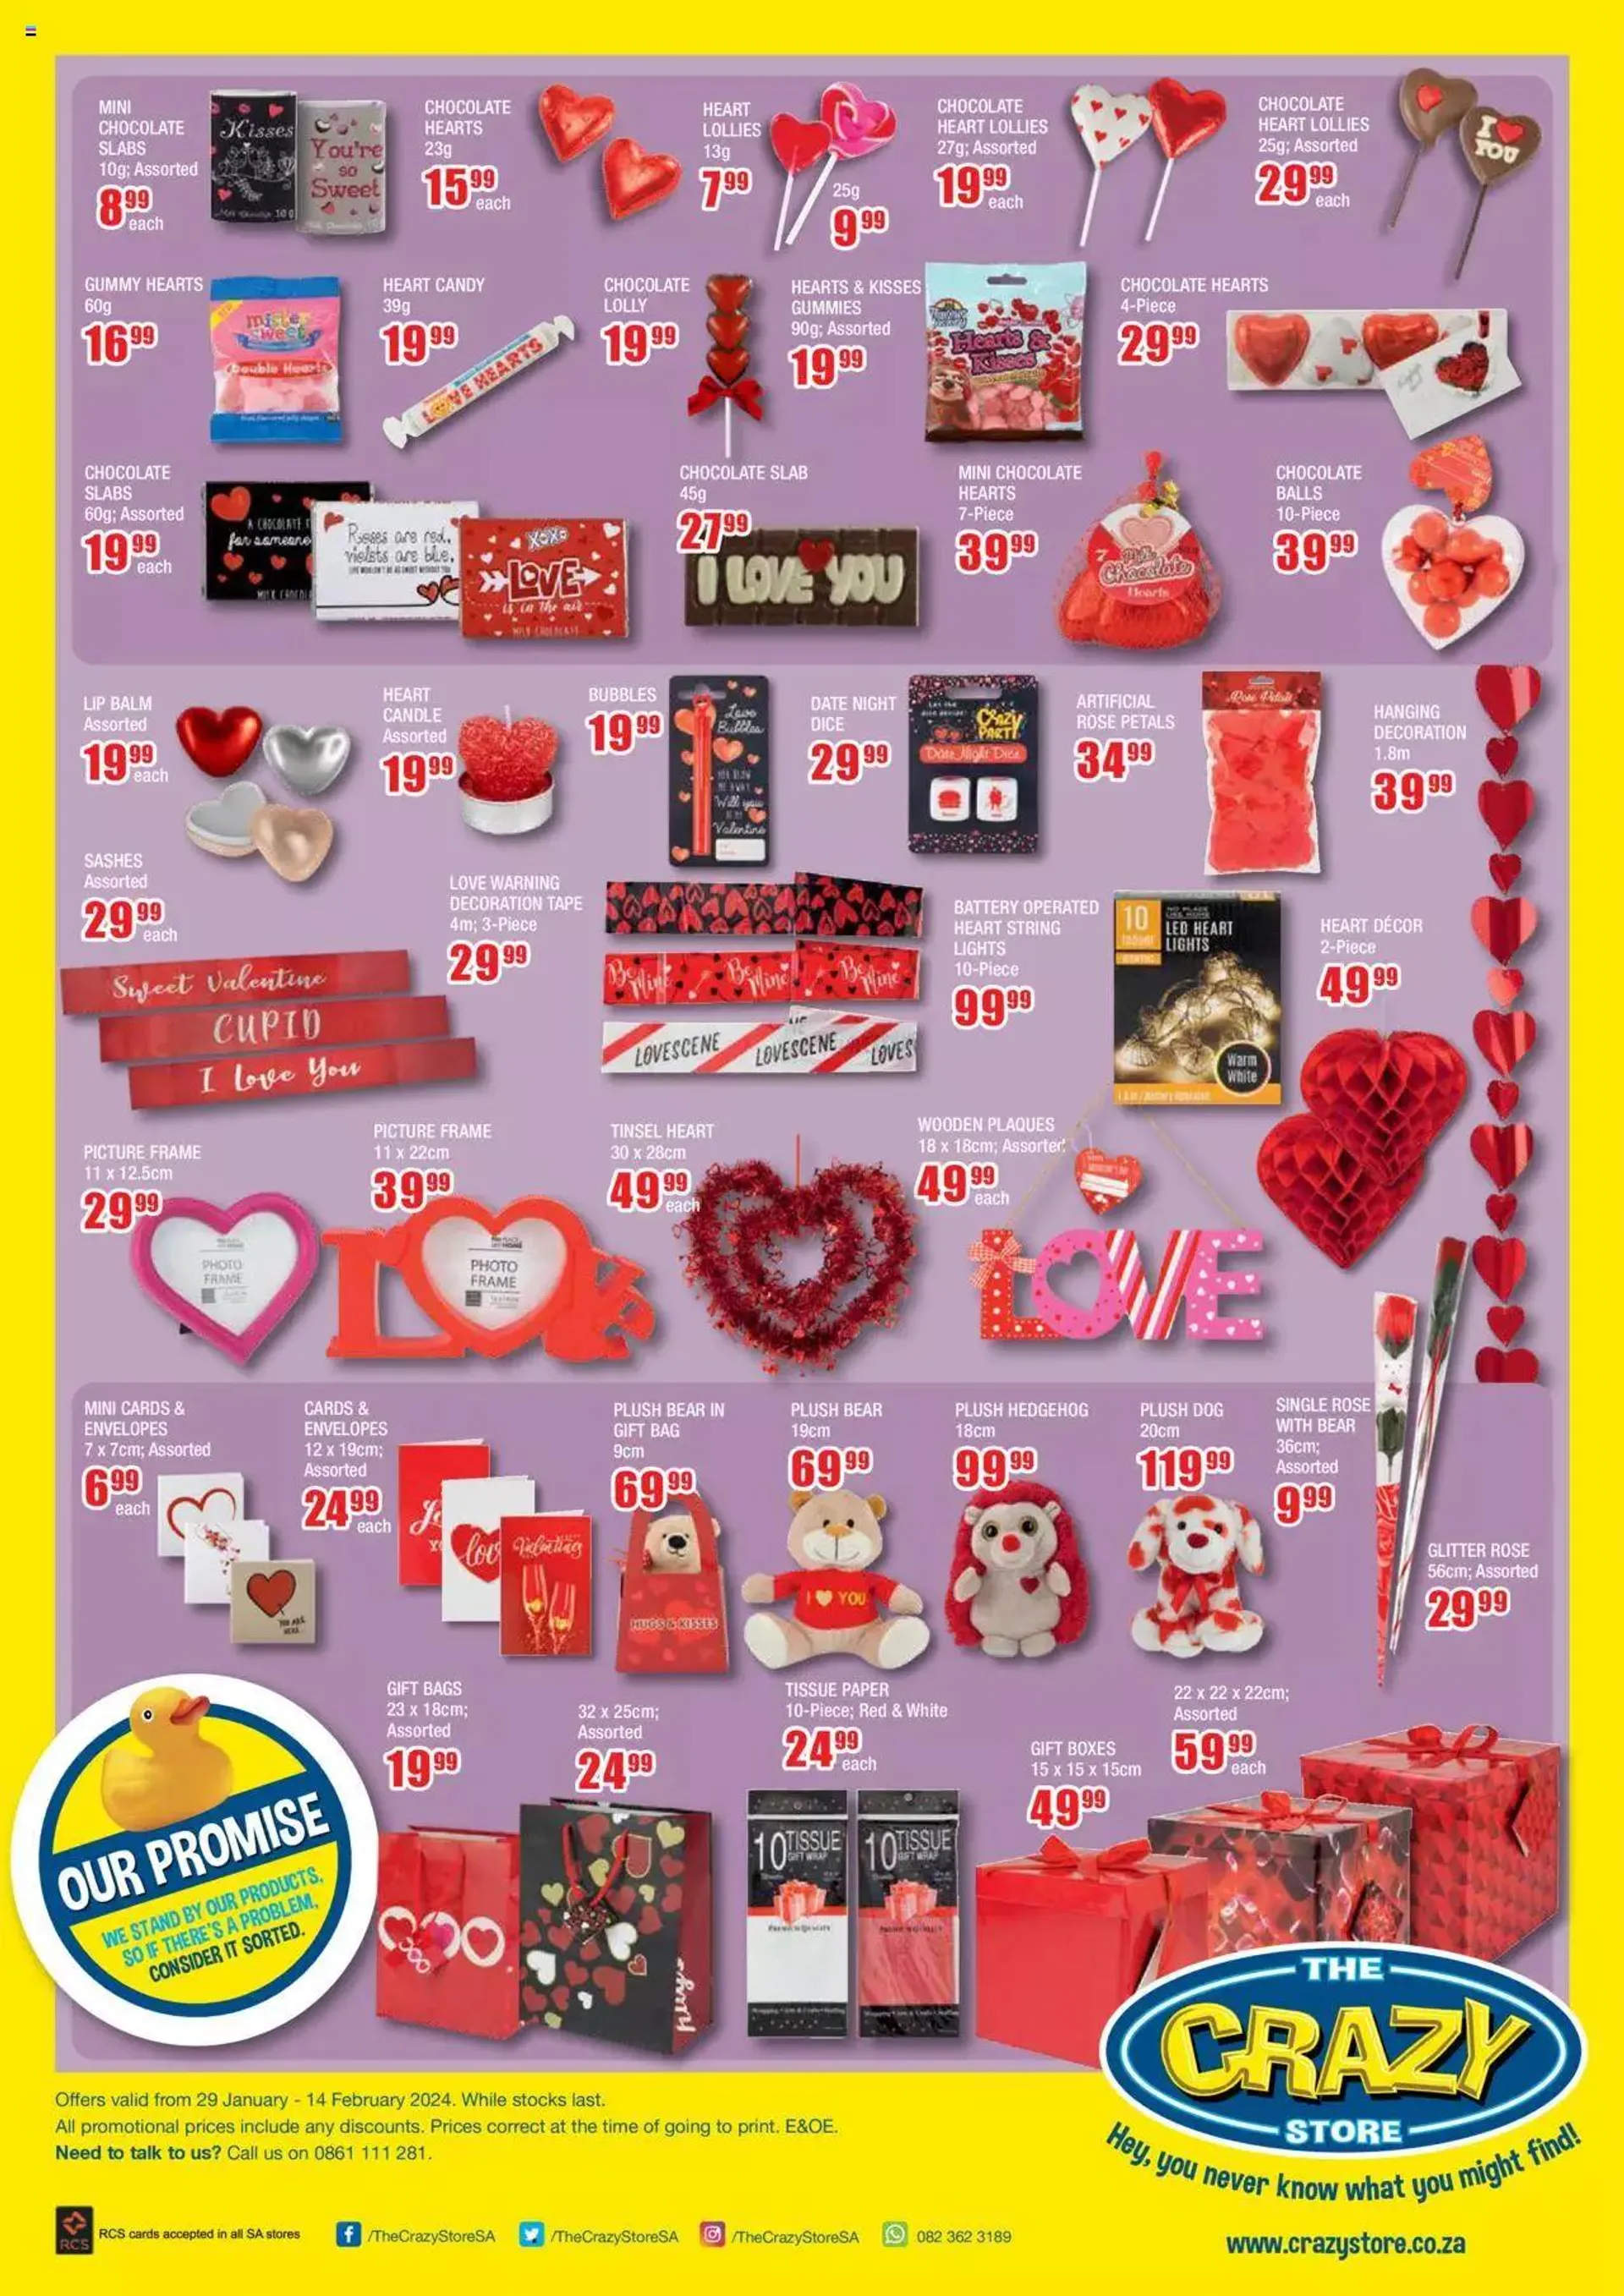 Crazy Store - Crazy Valentine's Gifts - 29 January 14 February 2024 - Page 2